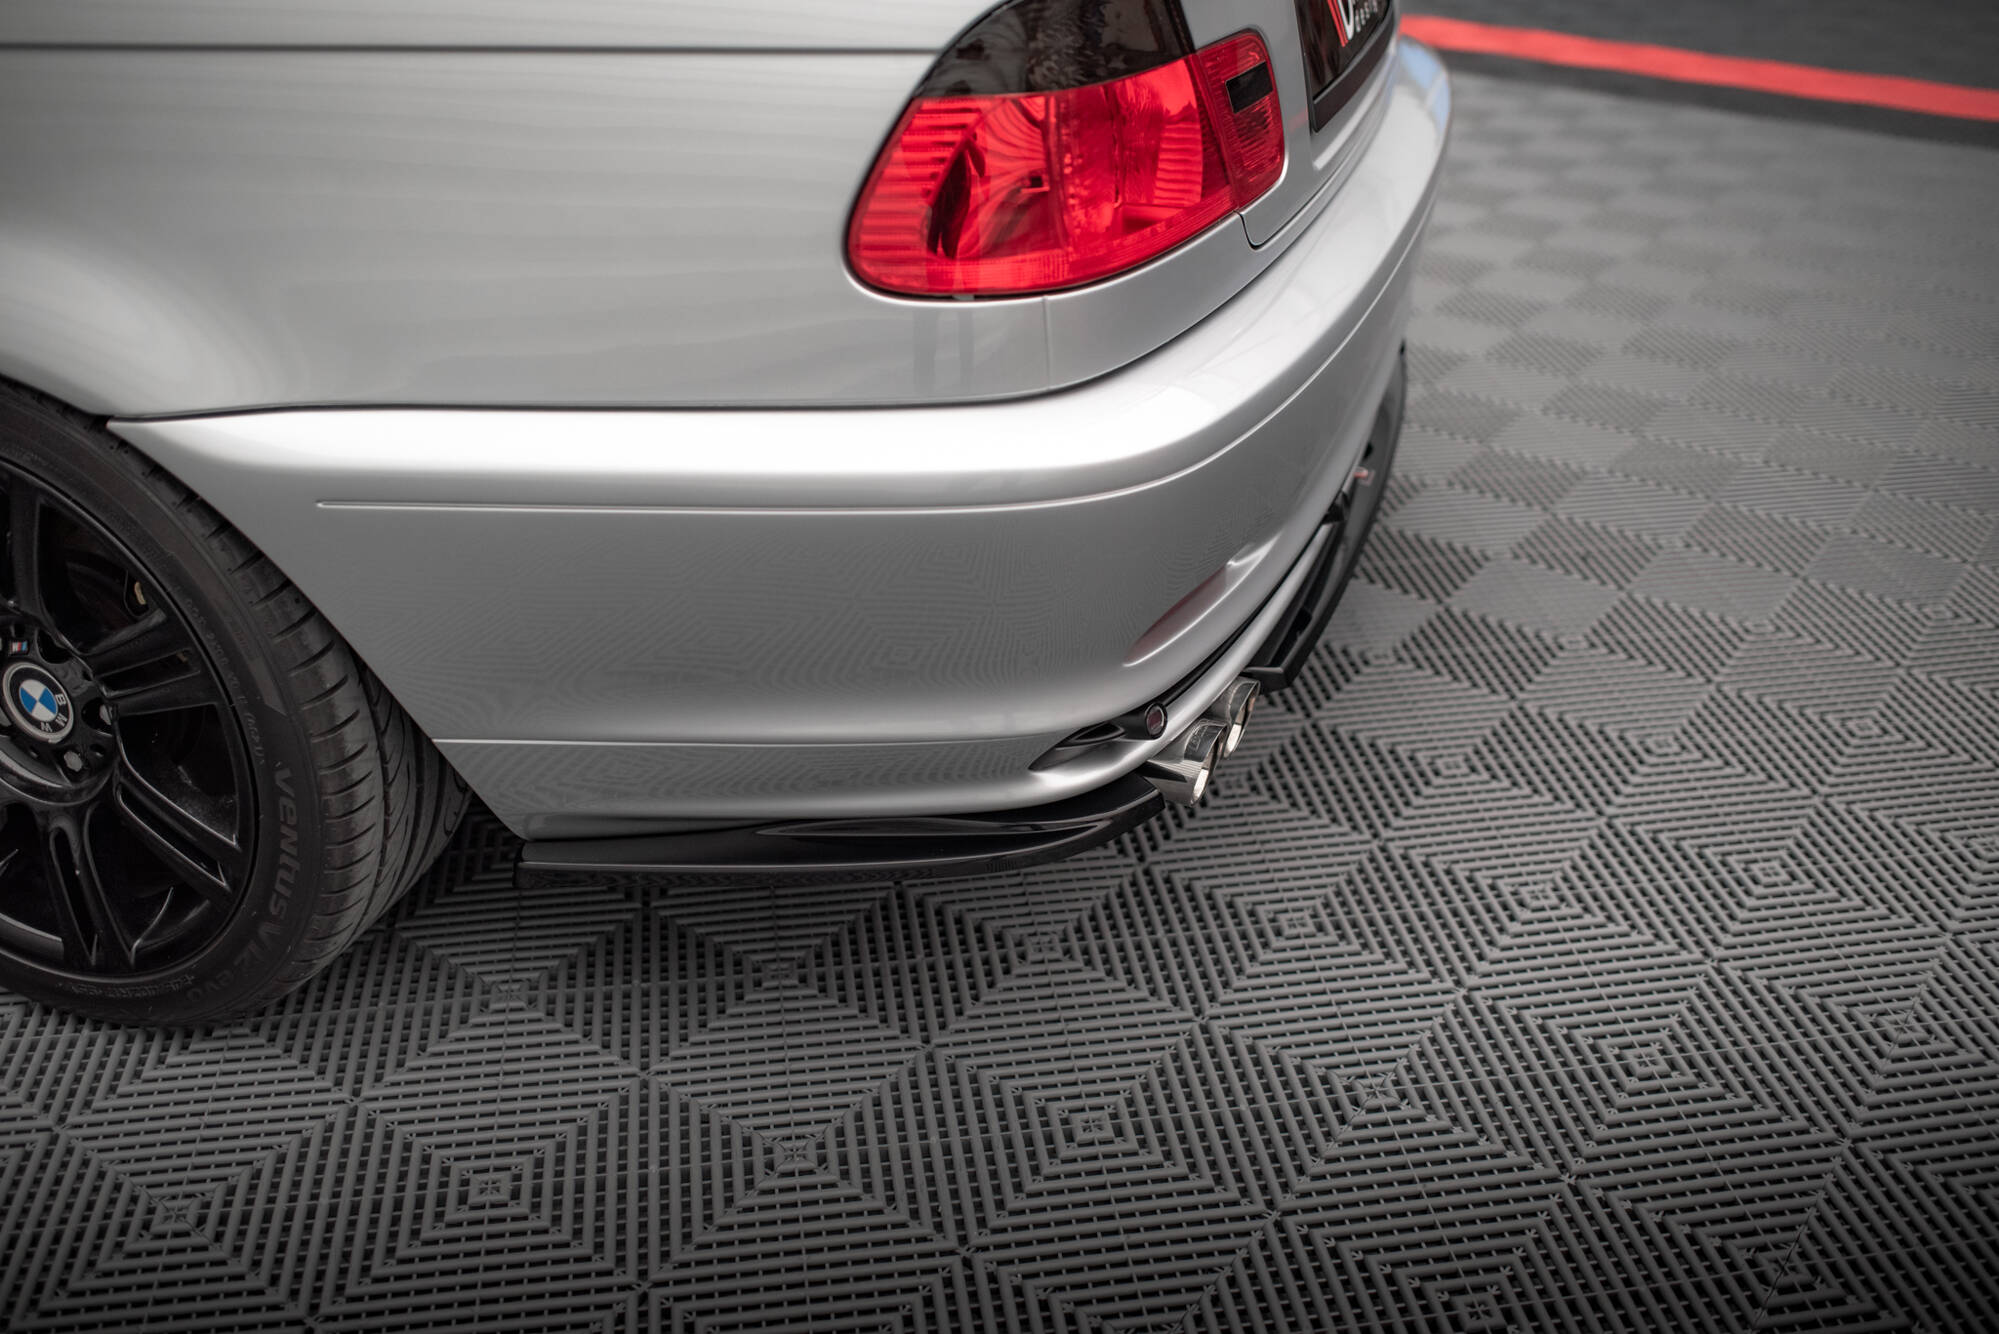 REAR SIDE SPLITTERS for BMW 3 E46 MPACK COUPE